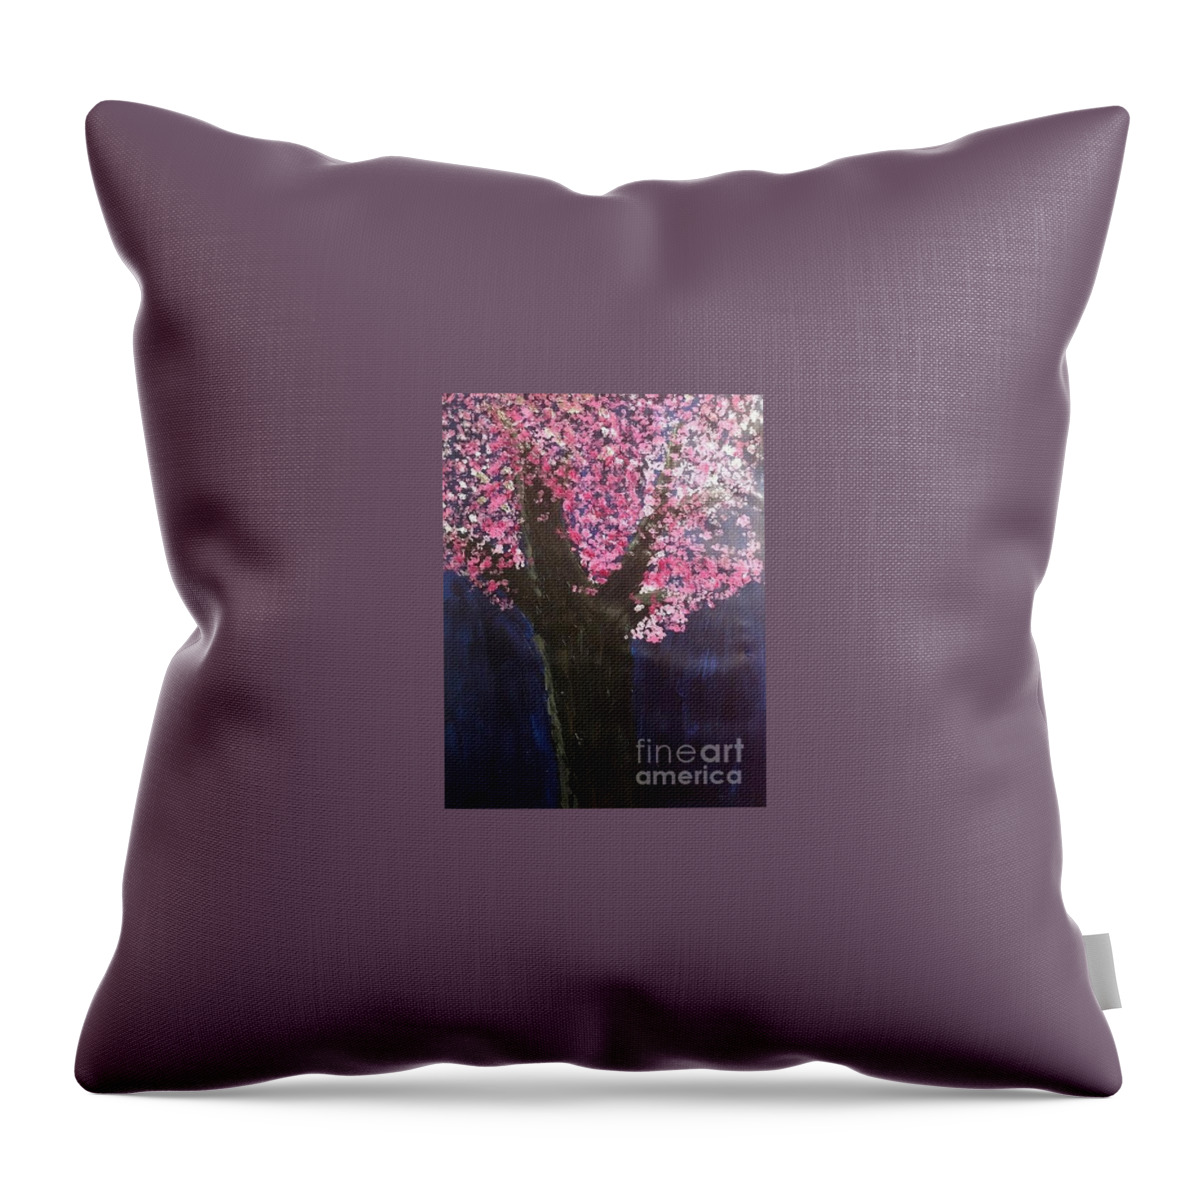 Cherry Blossoms Joy Colour Life Tree Renewal Friendship Throw Pillow featuring the painting Cherry Blossoms by Nina Jatania